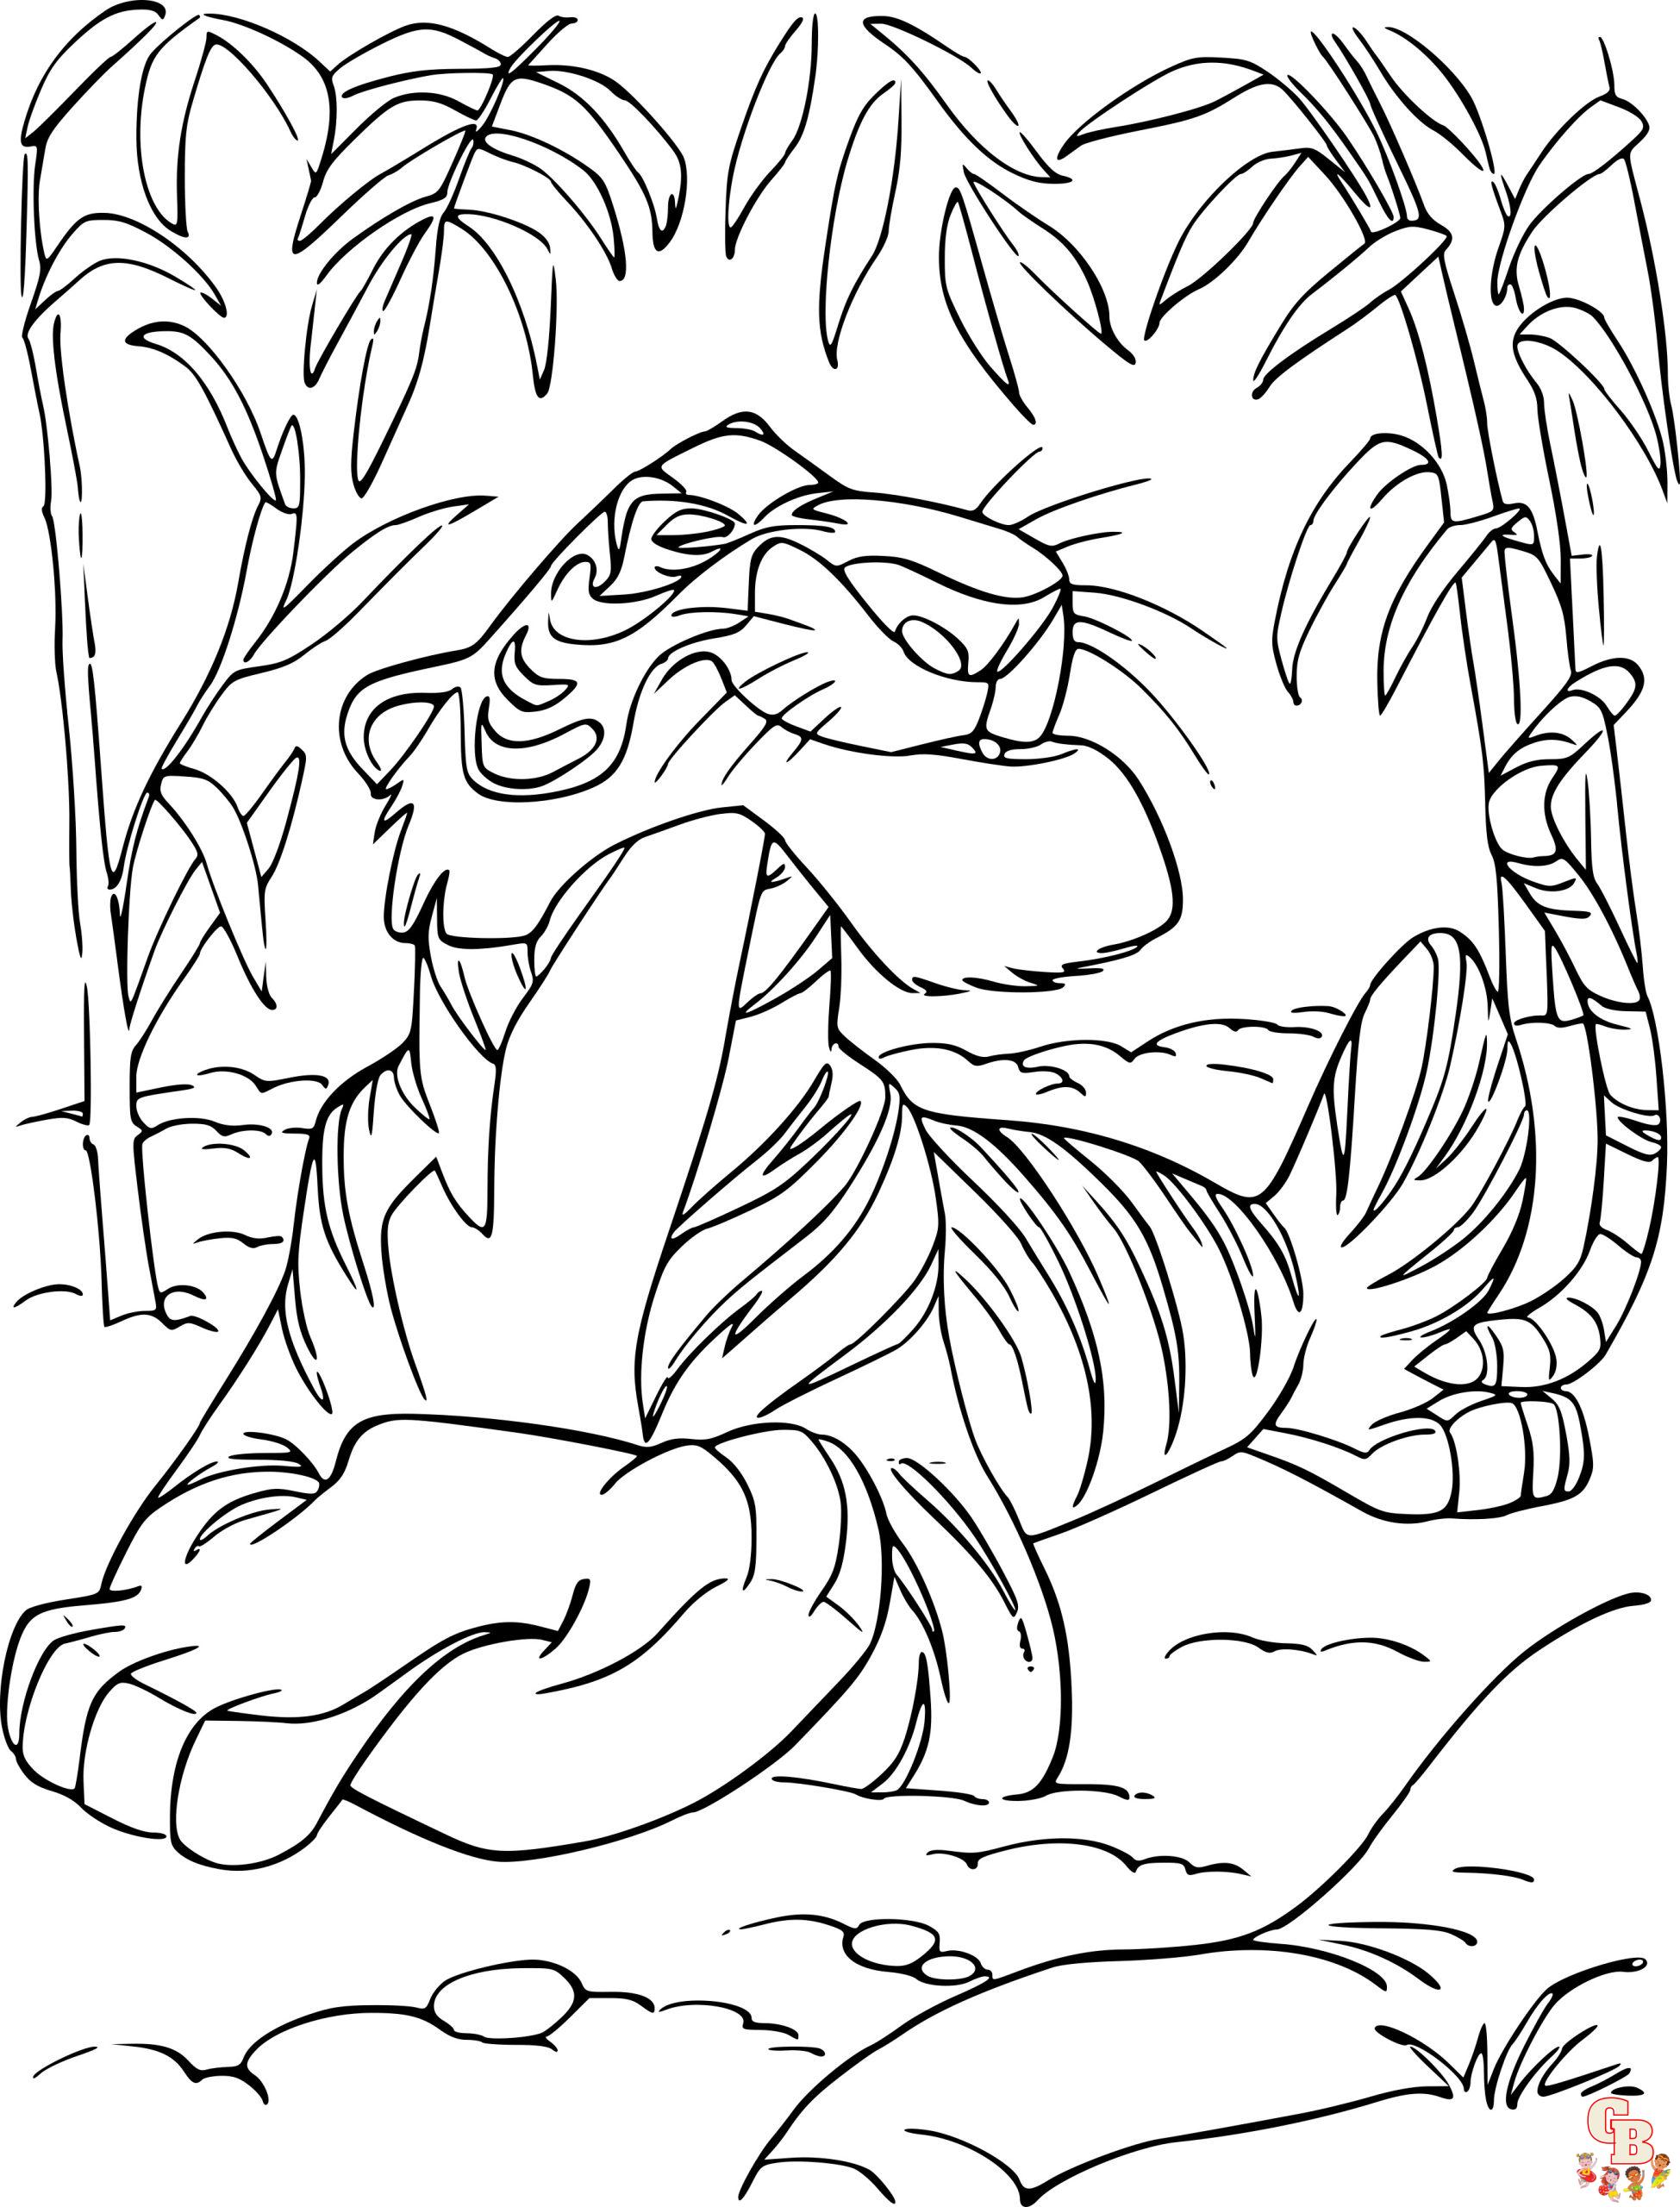 Shee Khan Coloring Pages 4